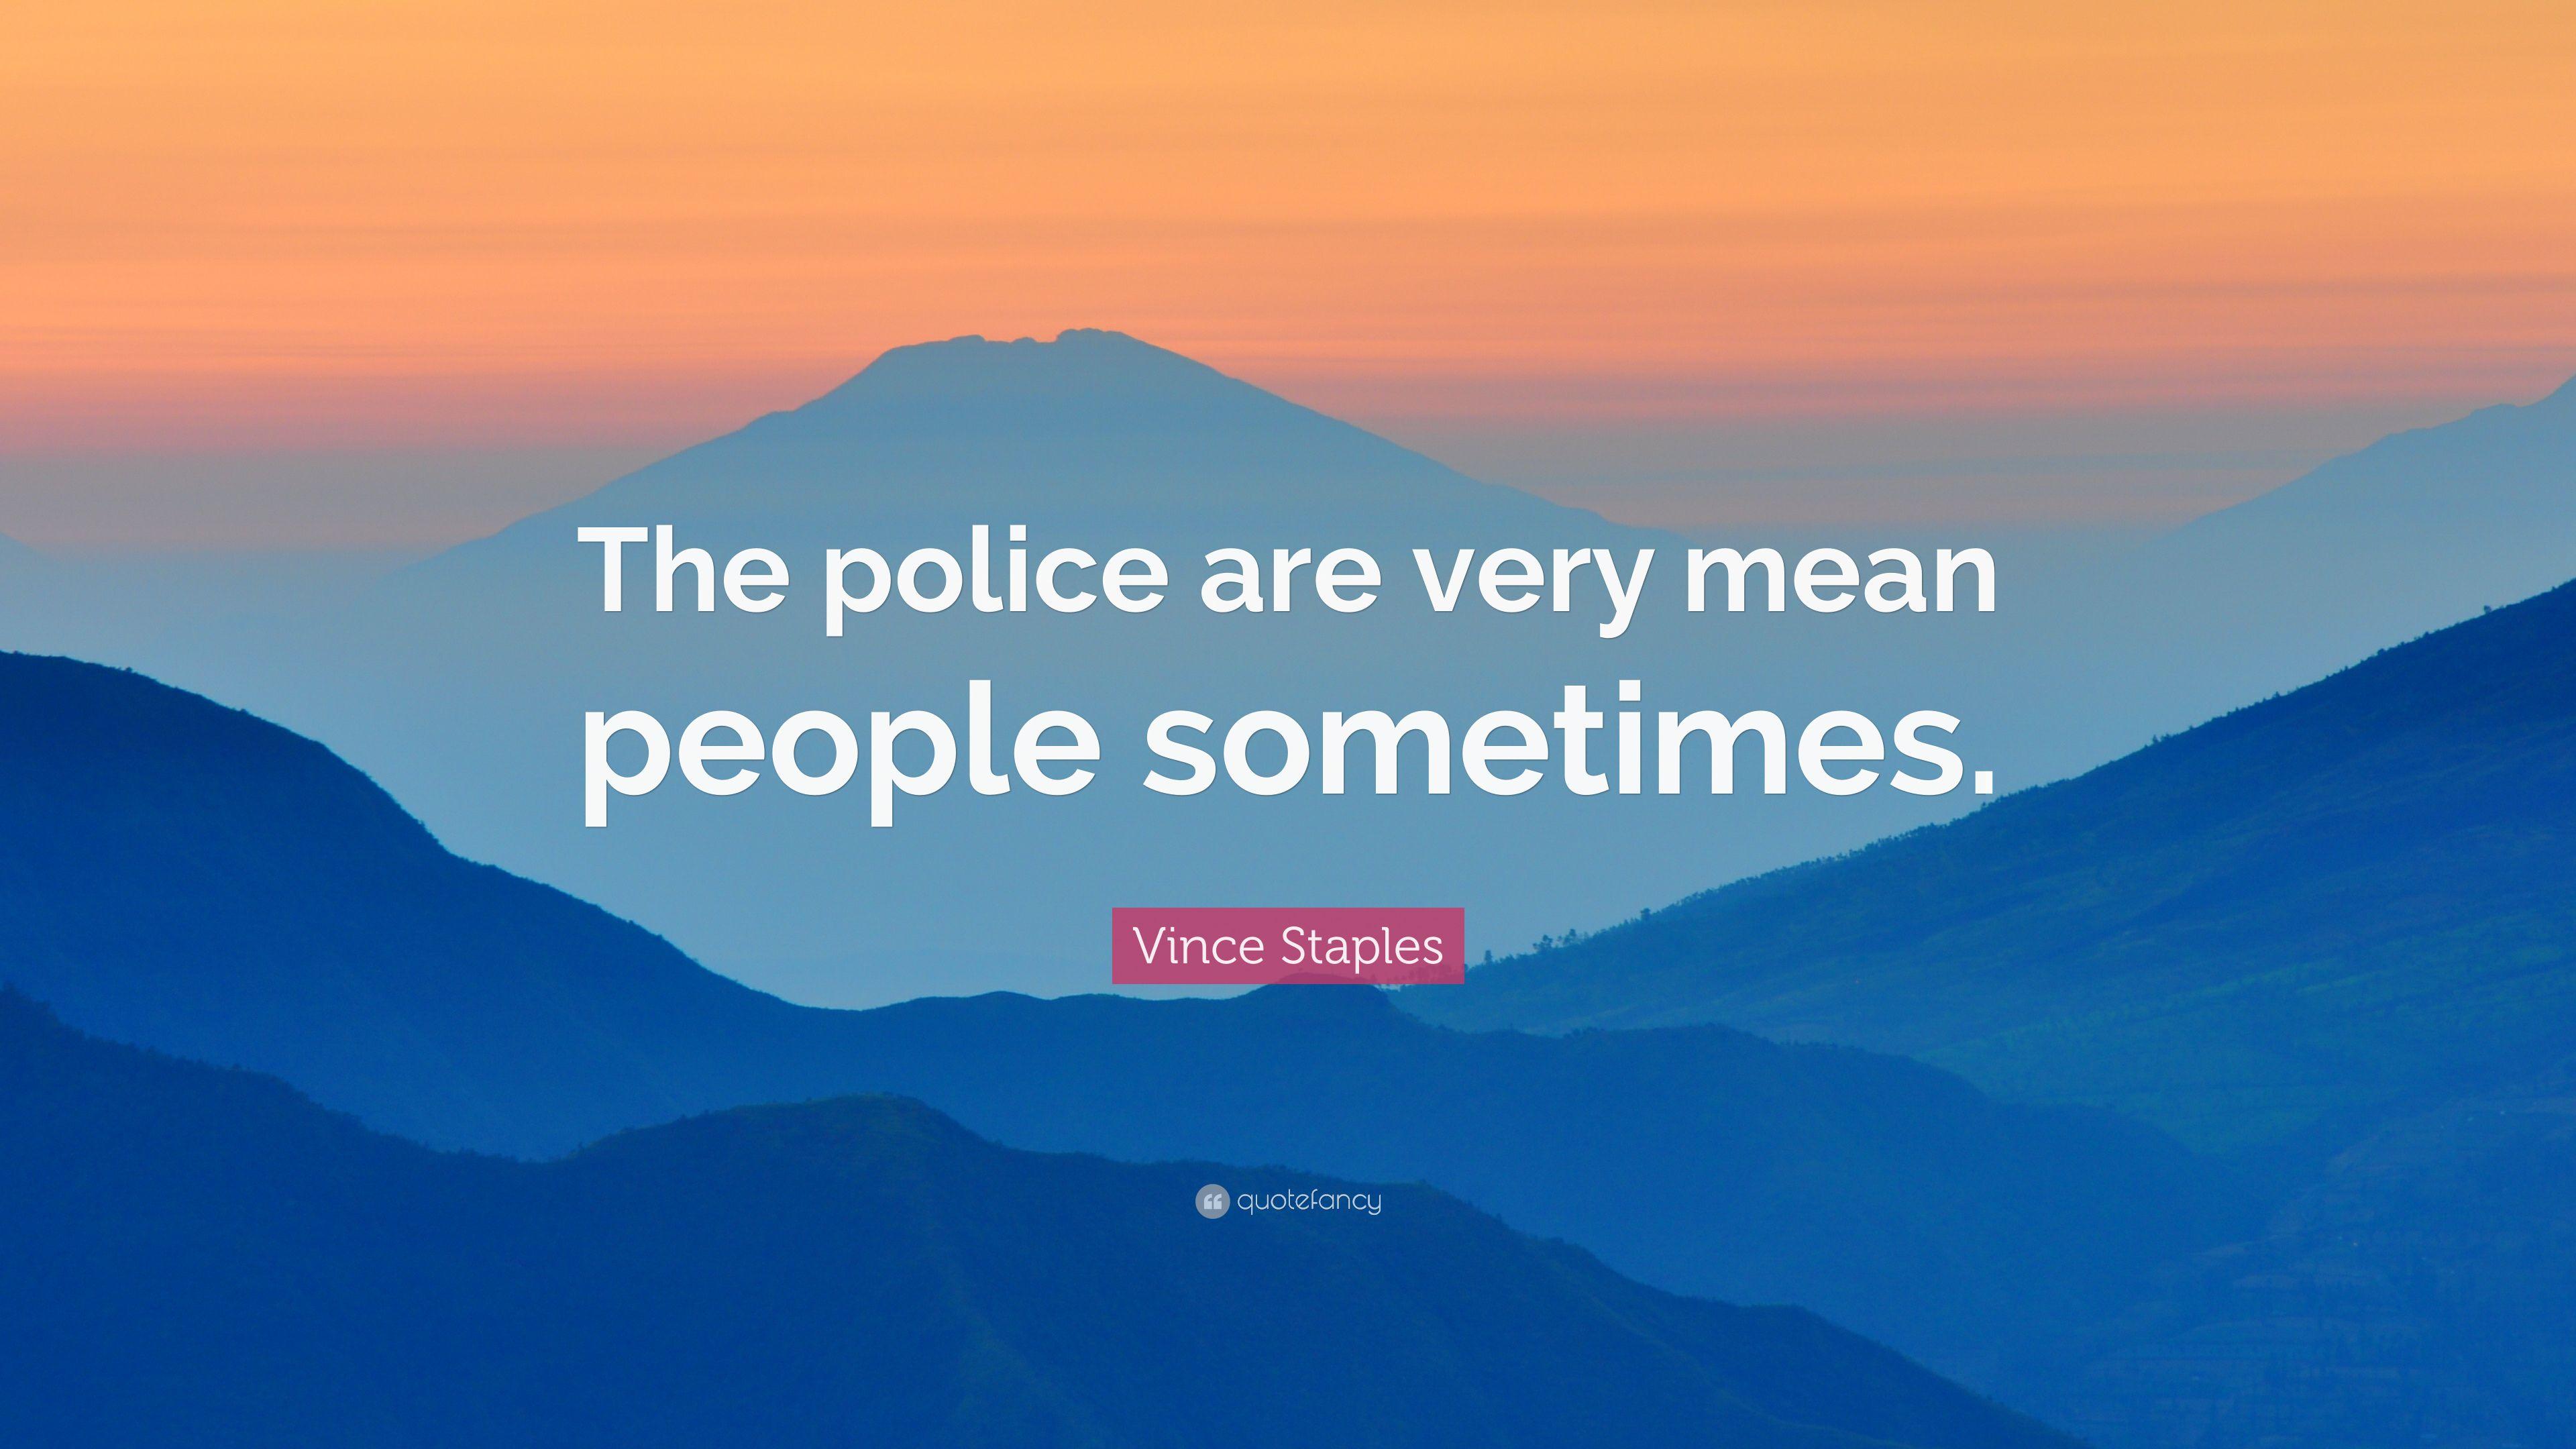 Vince Staples Quote: “The police are very mean people sometimes.” 7